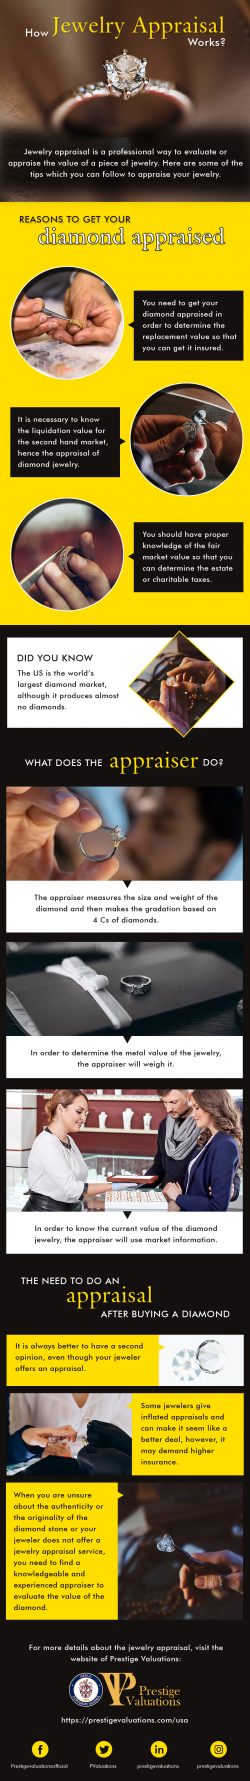 How Jewelry Appraisal Works- Infographic